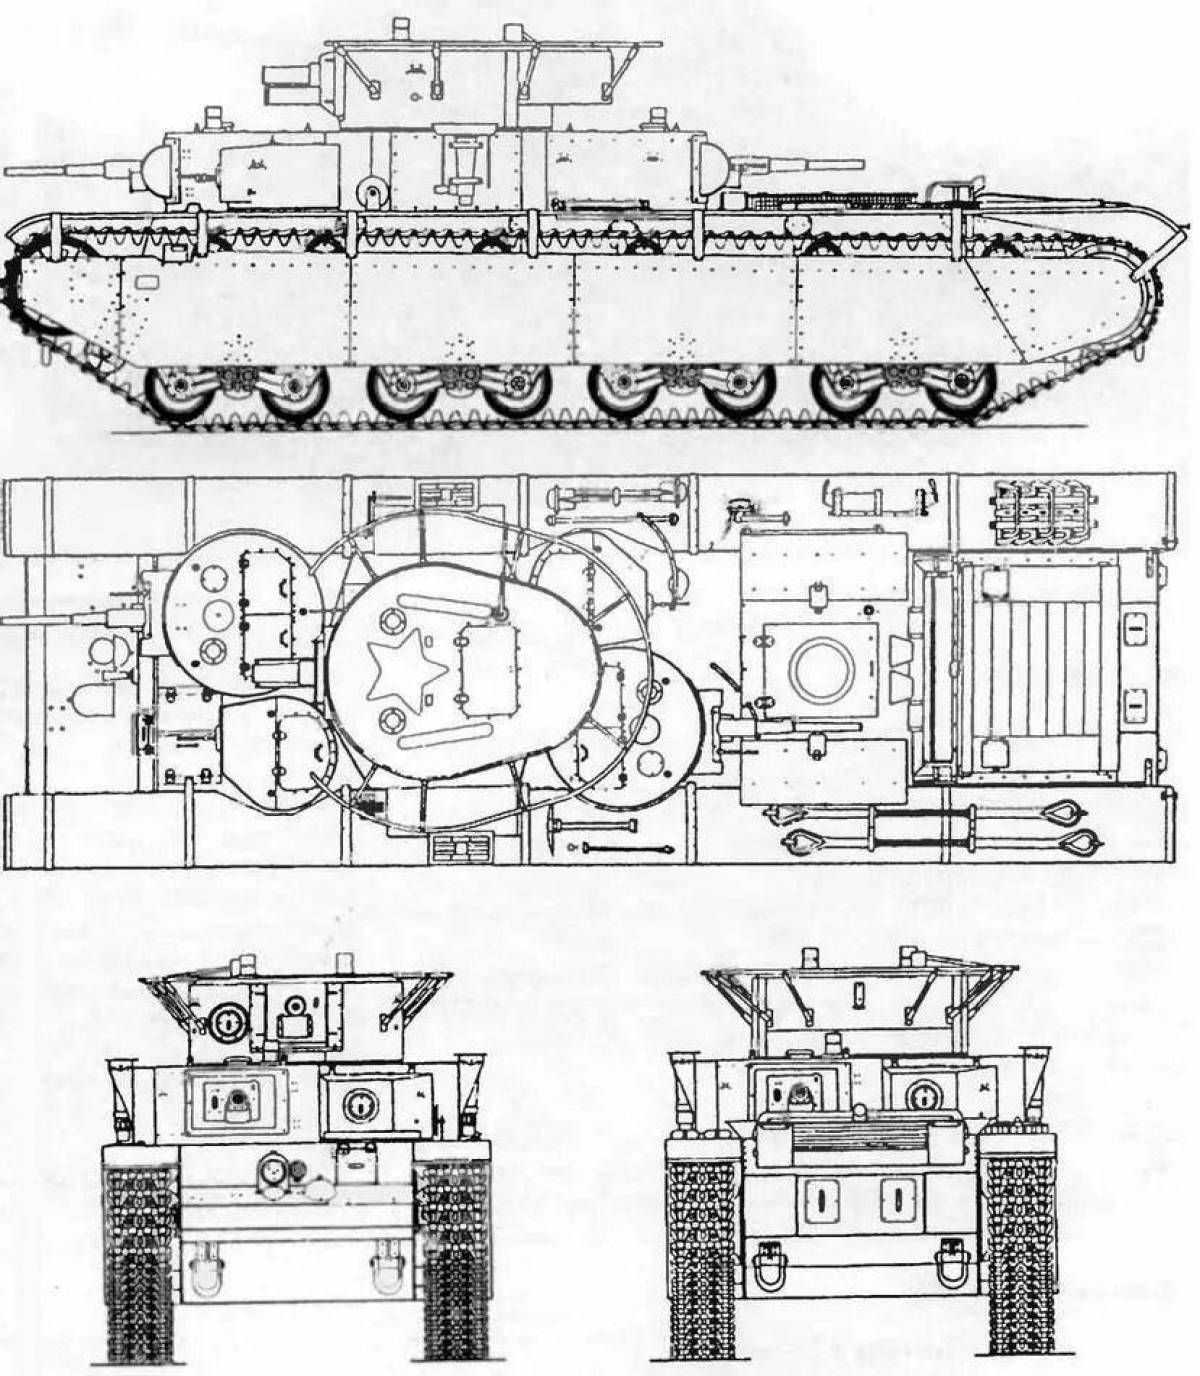 Attractive t35 tank coloring book